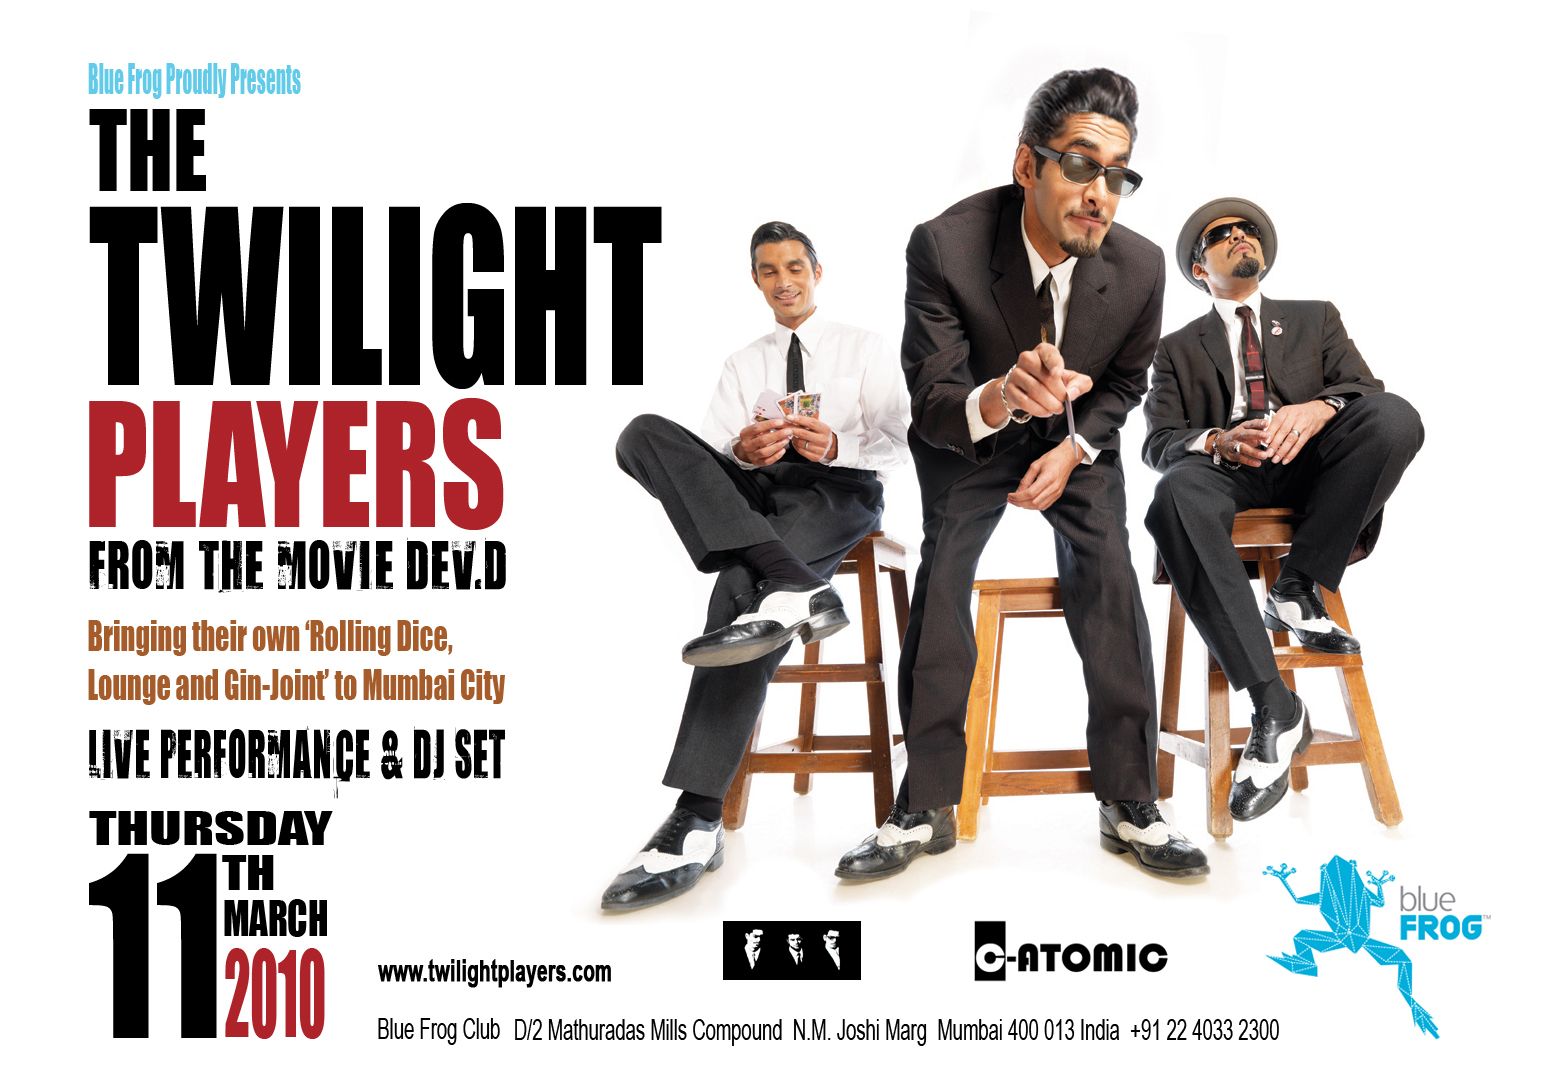 The Twilight Players @ Blue Frog: Be There for a Dev D. repeat!